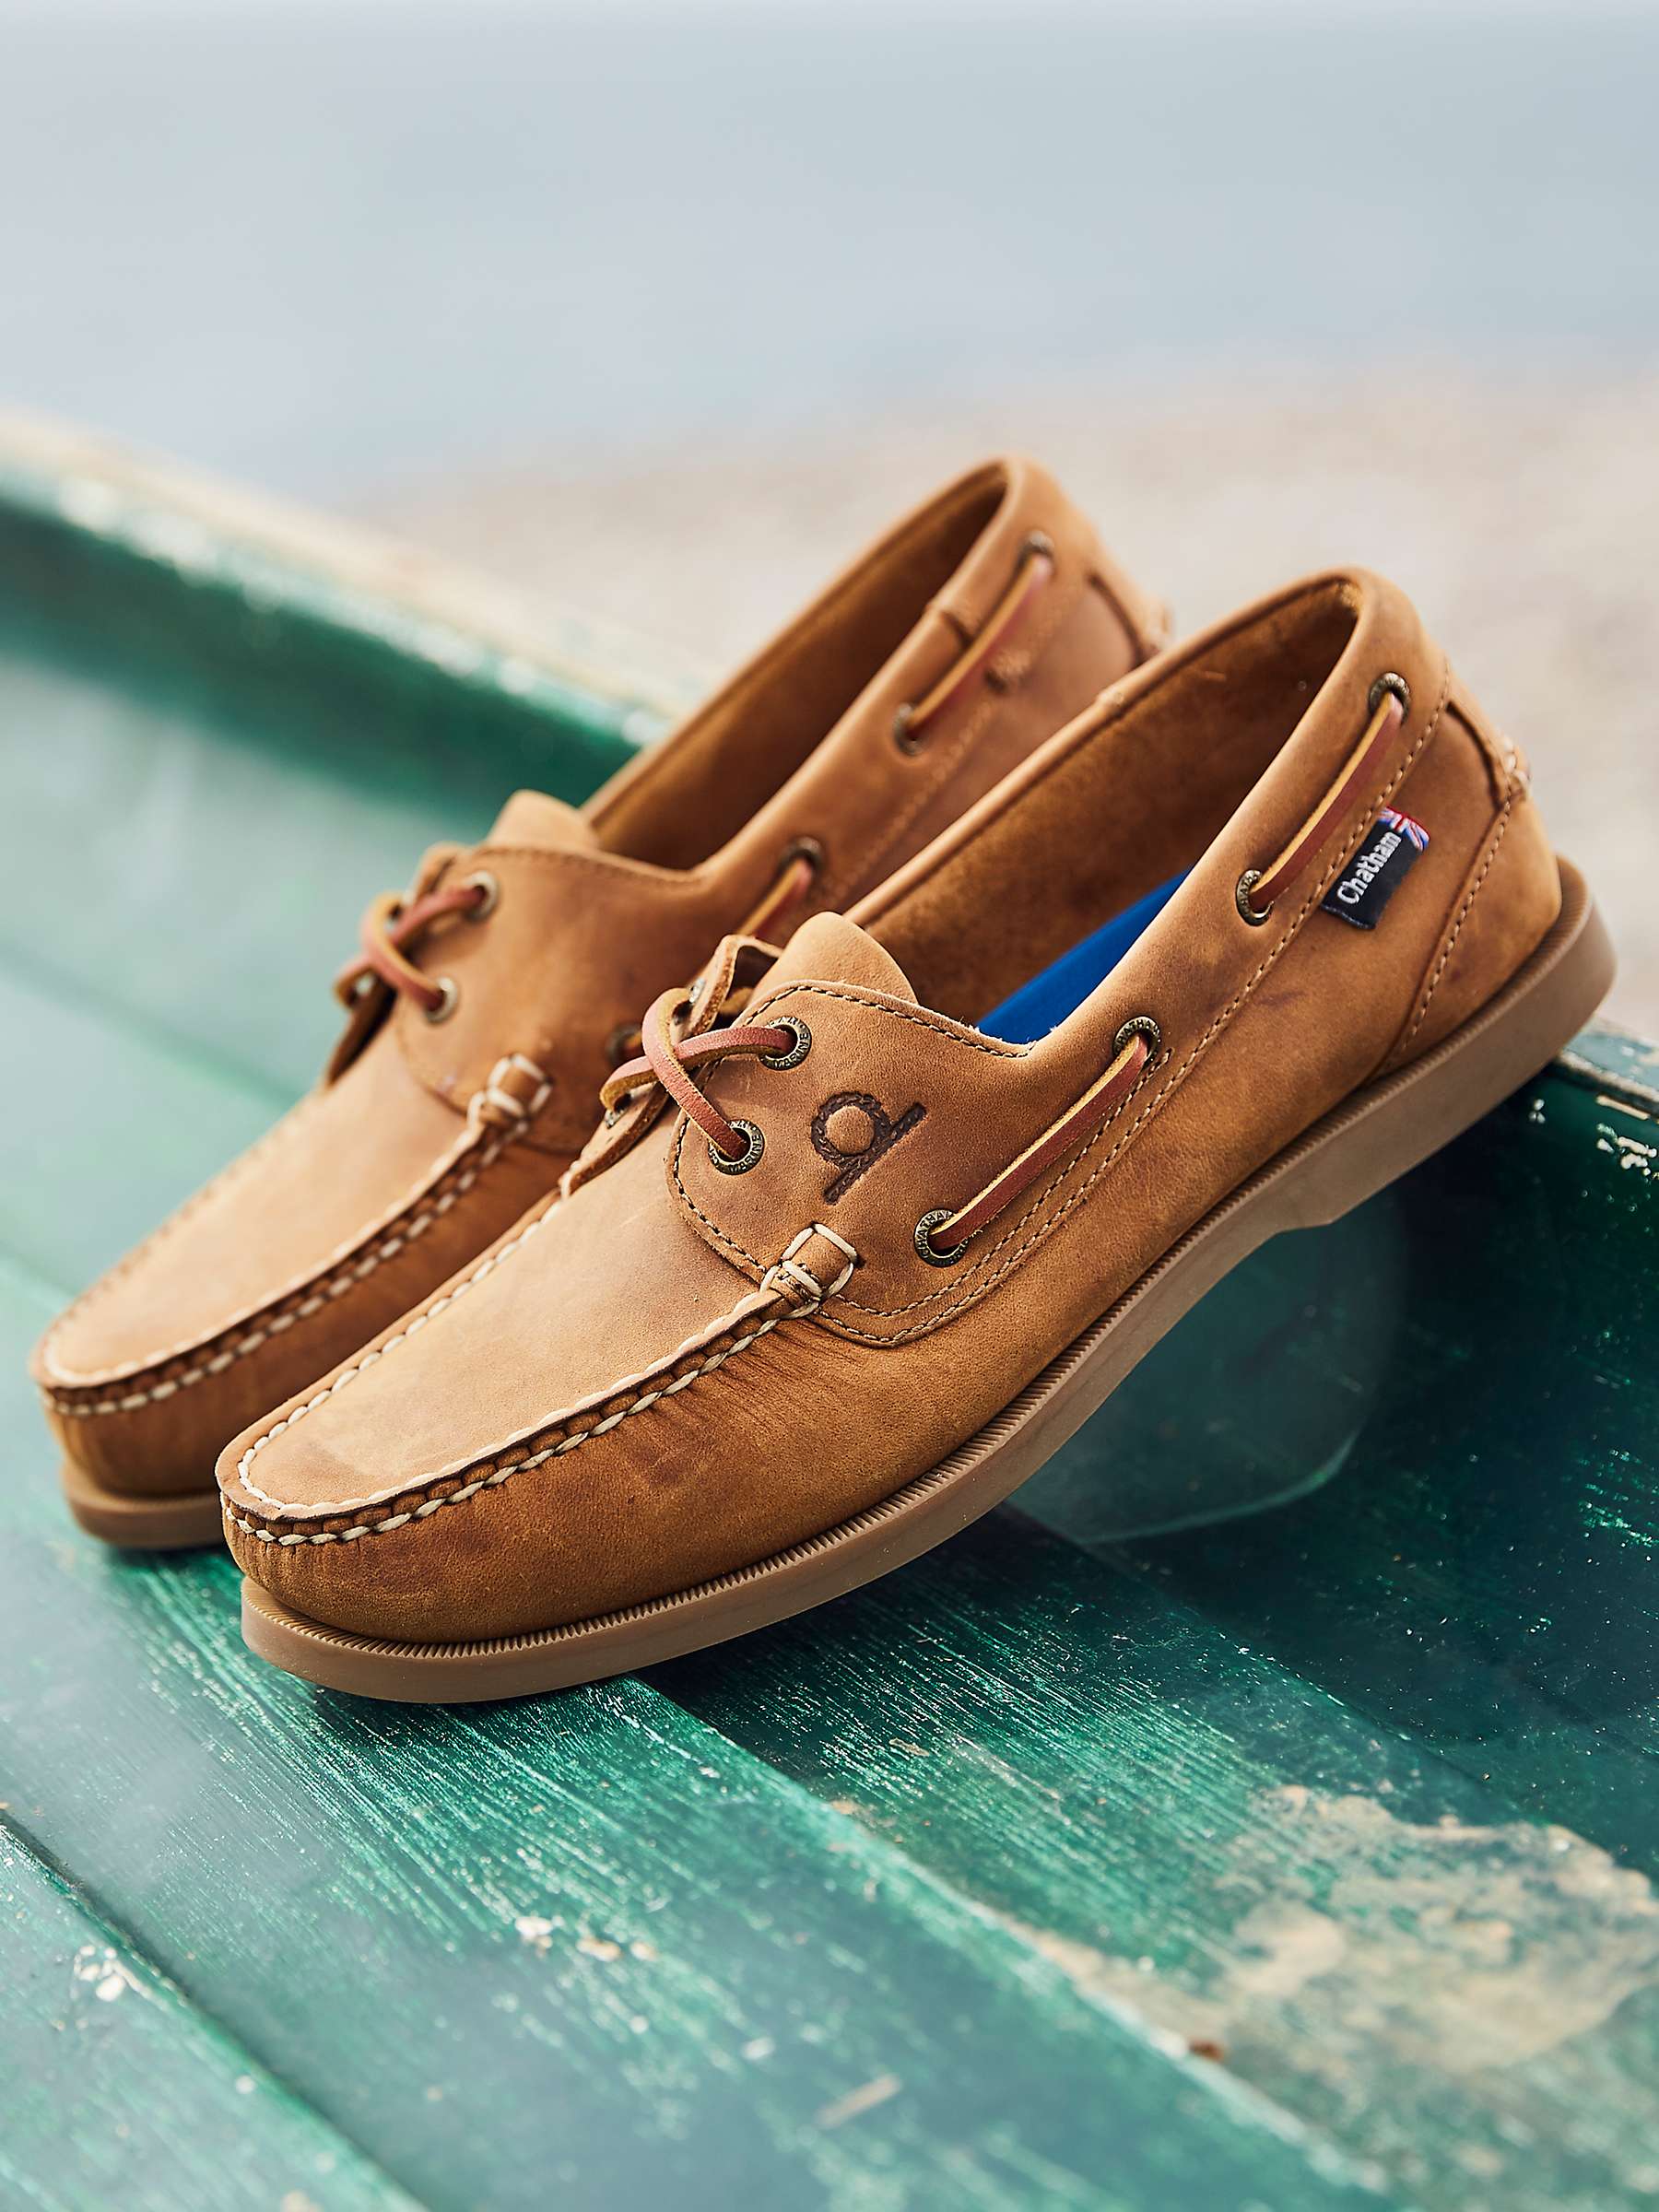 Buy Chatham Deck II G2 Leather Boat Shoes Online at johnlewis.com